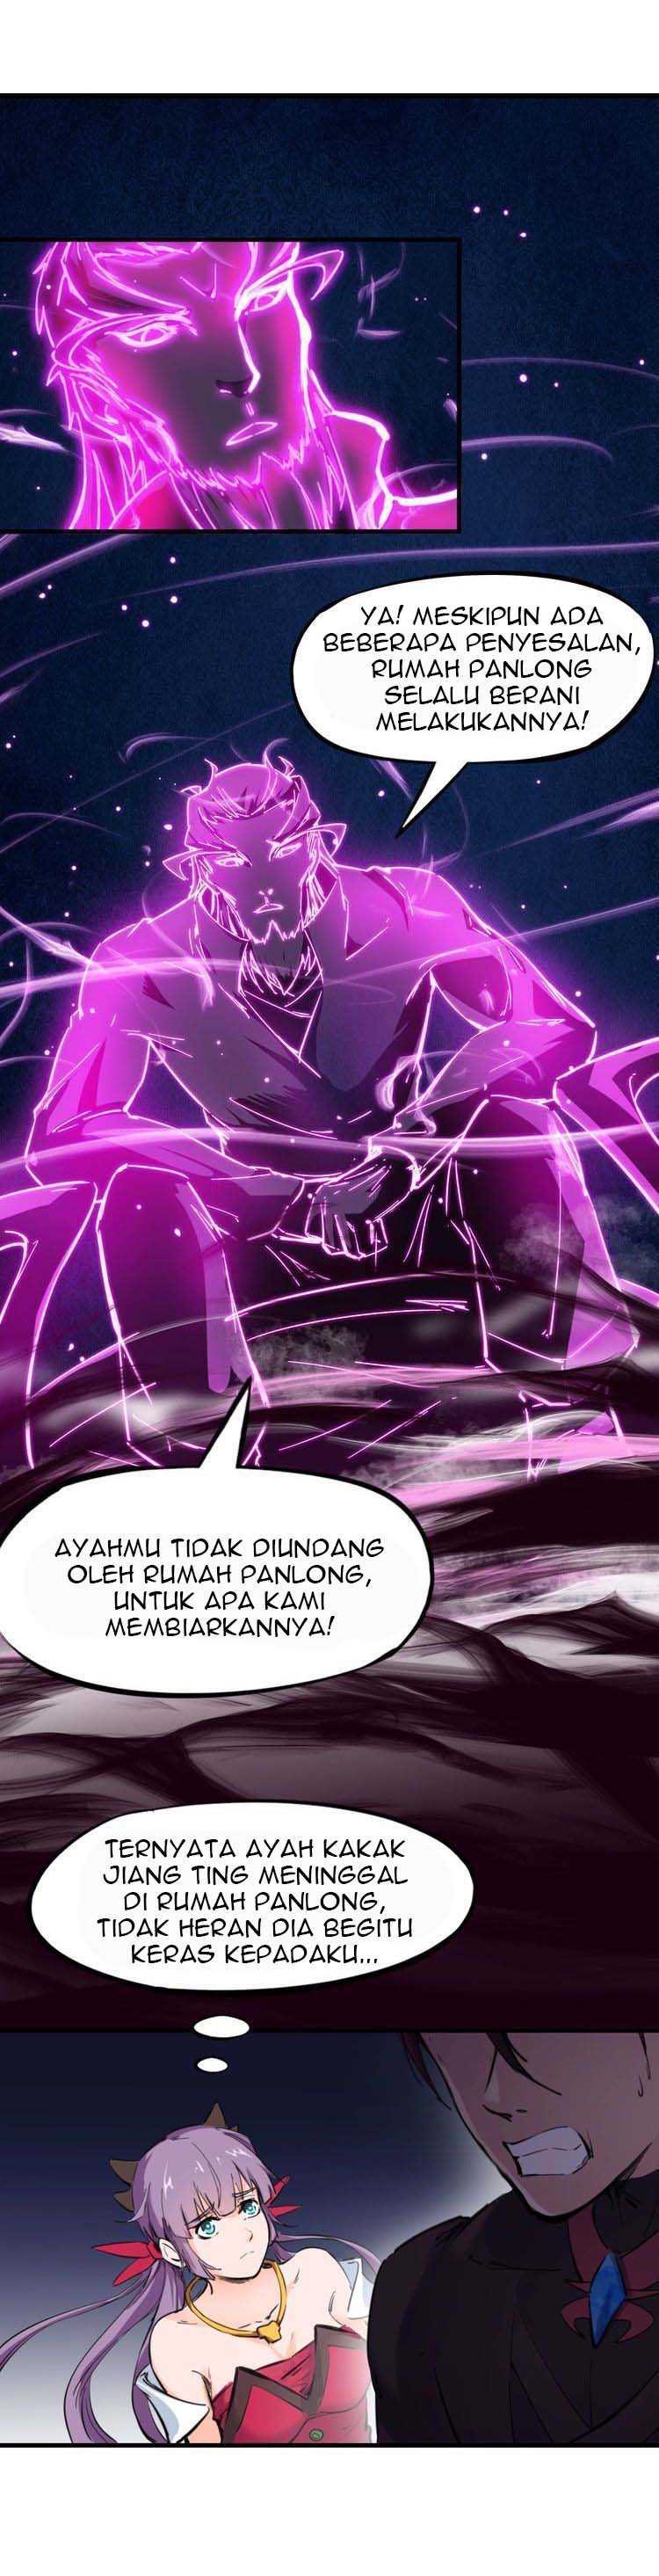 Dragon’s Blood Vessels Chapter 41